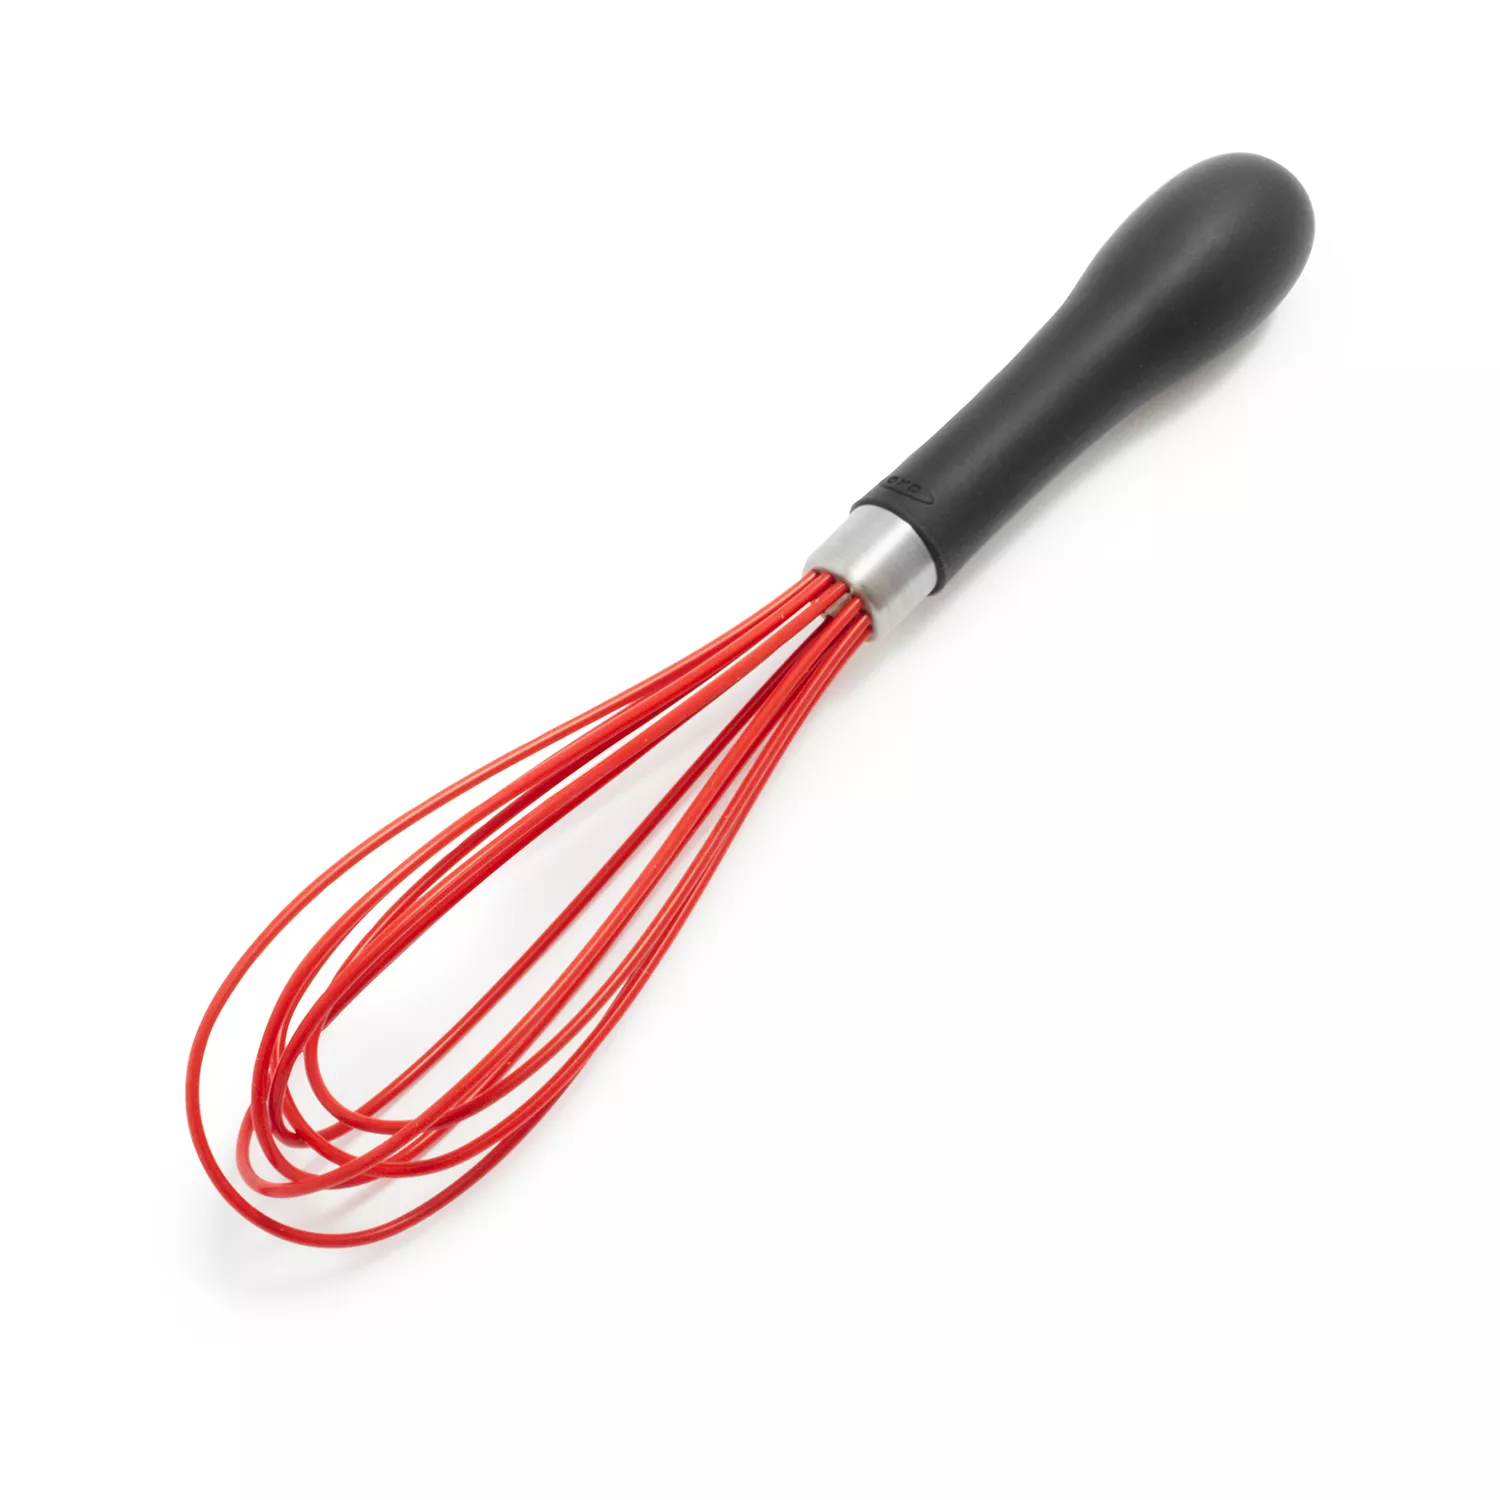 OXO Good Grips 11-Inch Balloon Whisk & 11-Inch Silicone Balloon Whisk - Red